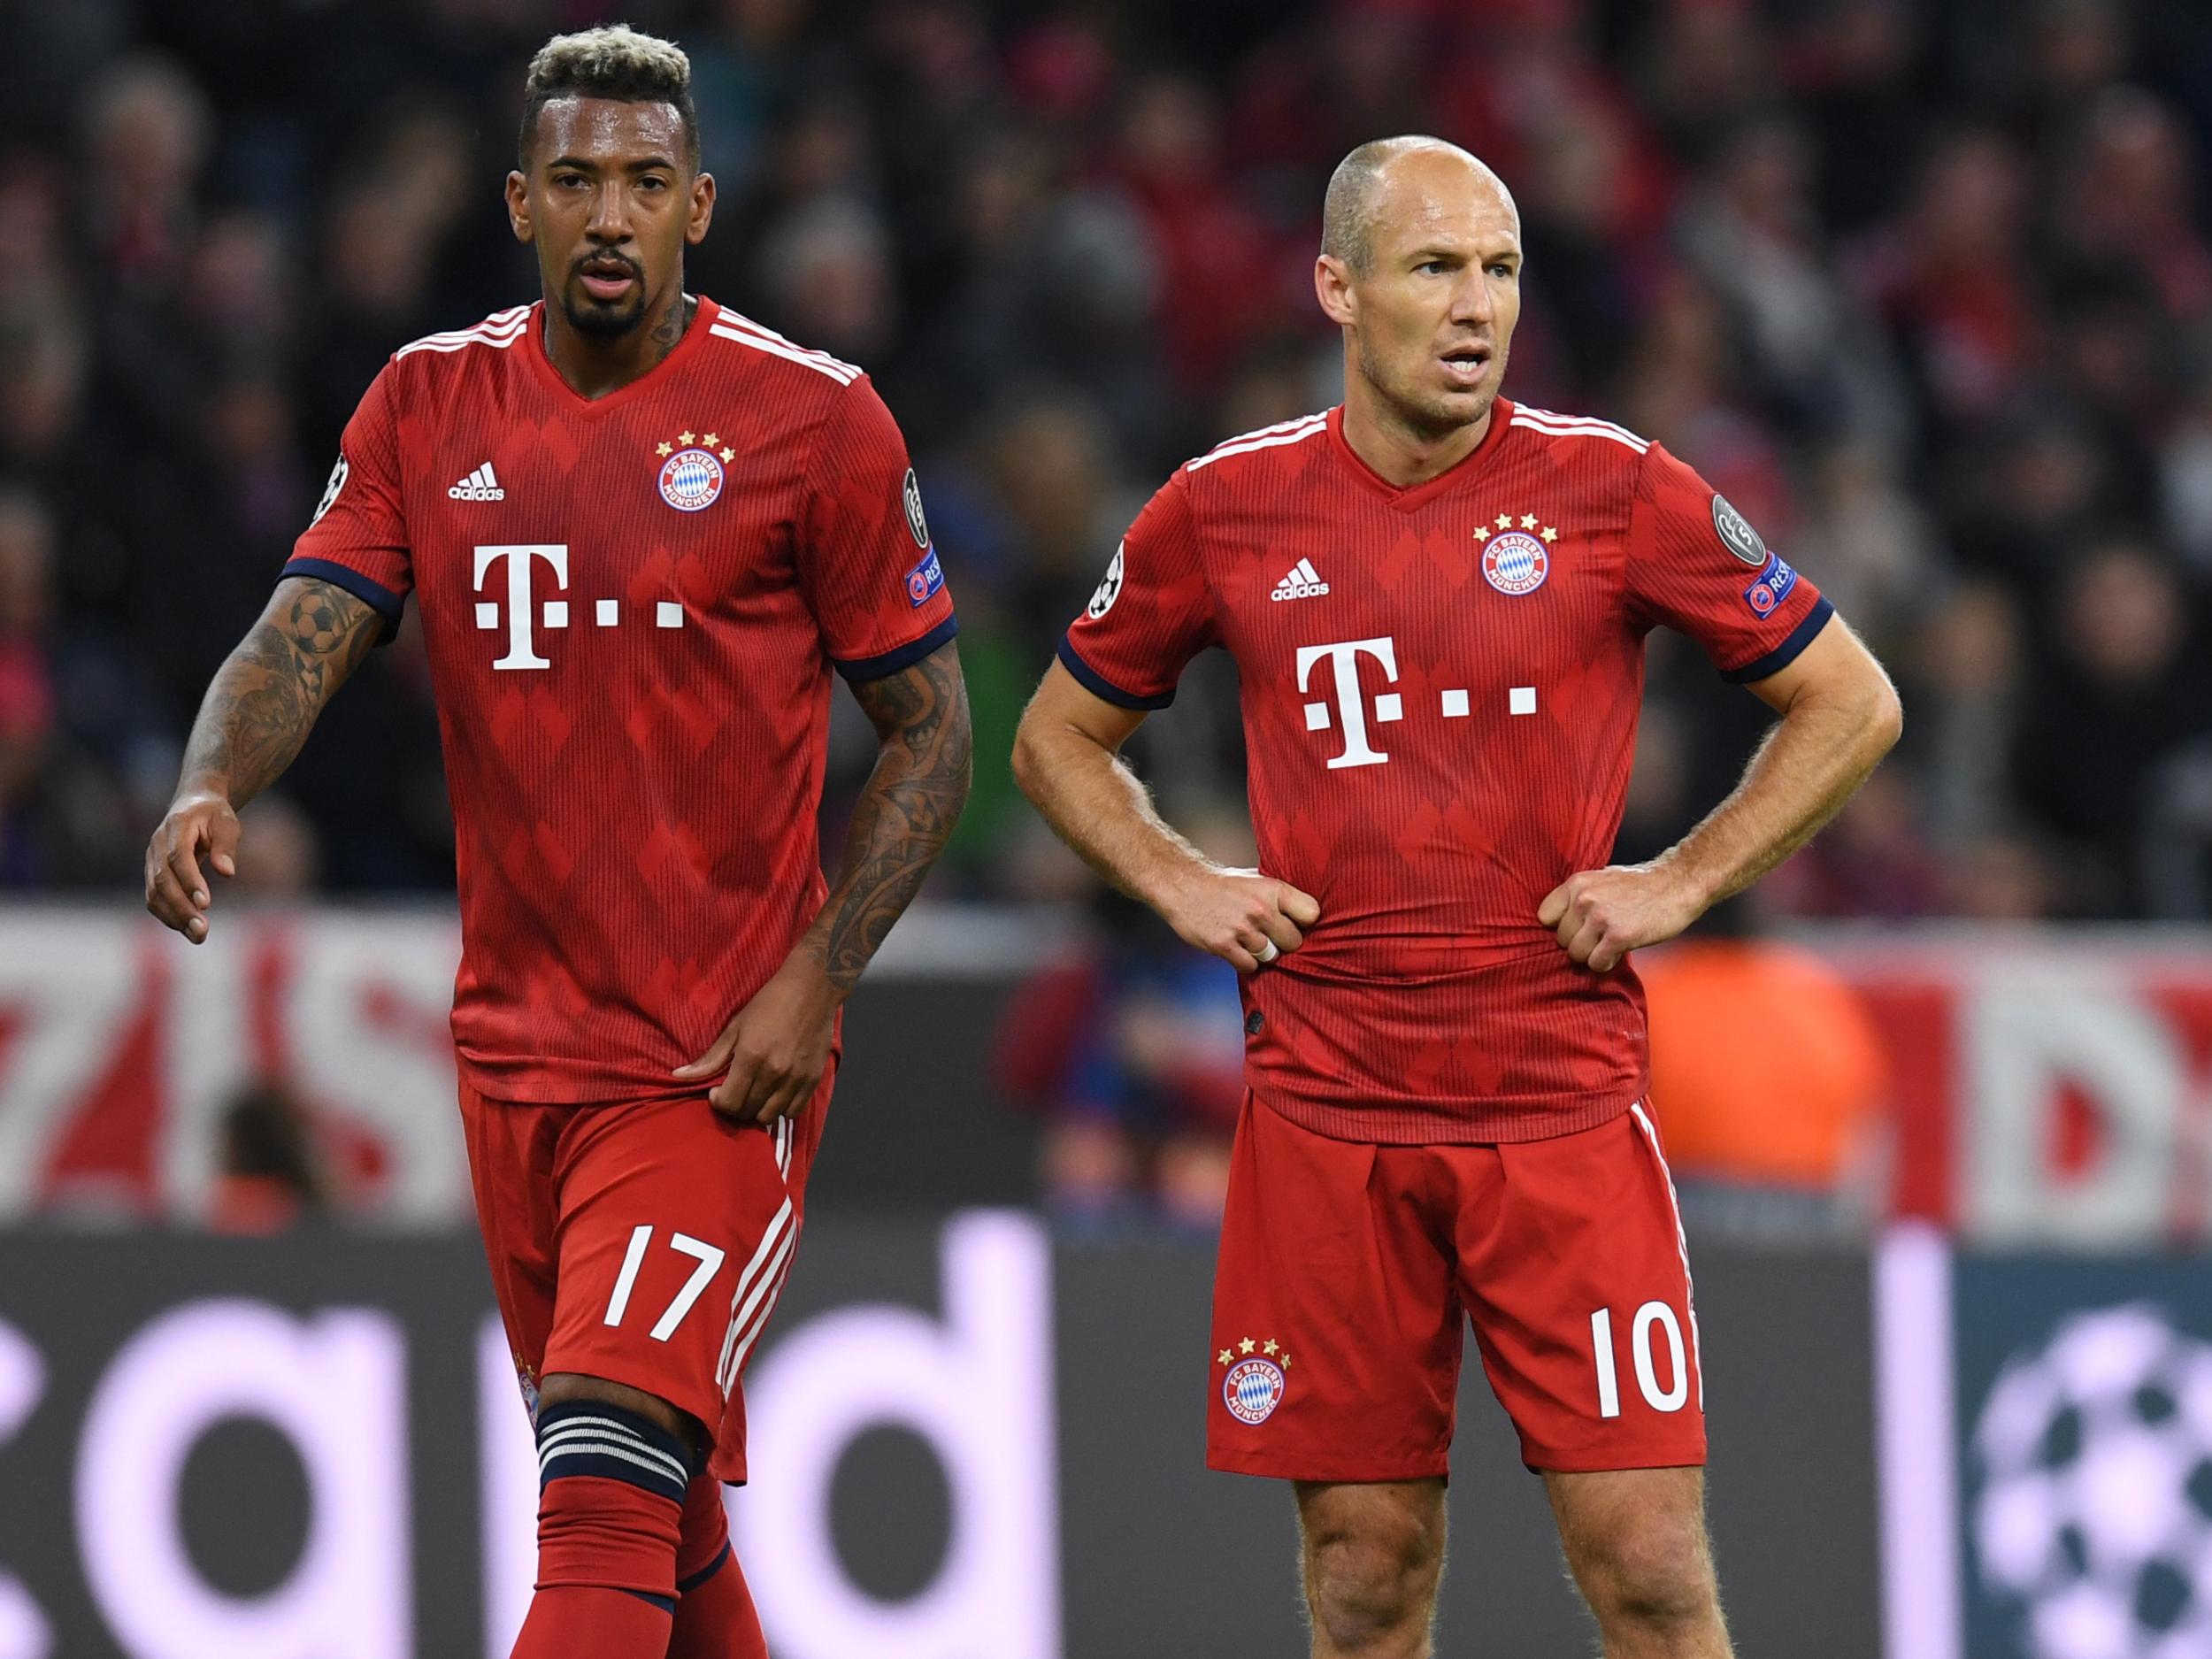 Some of Bayern Munich’s key players are falling short of expectations this season